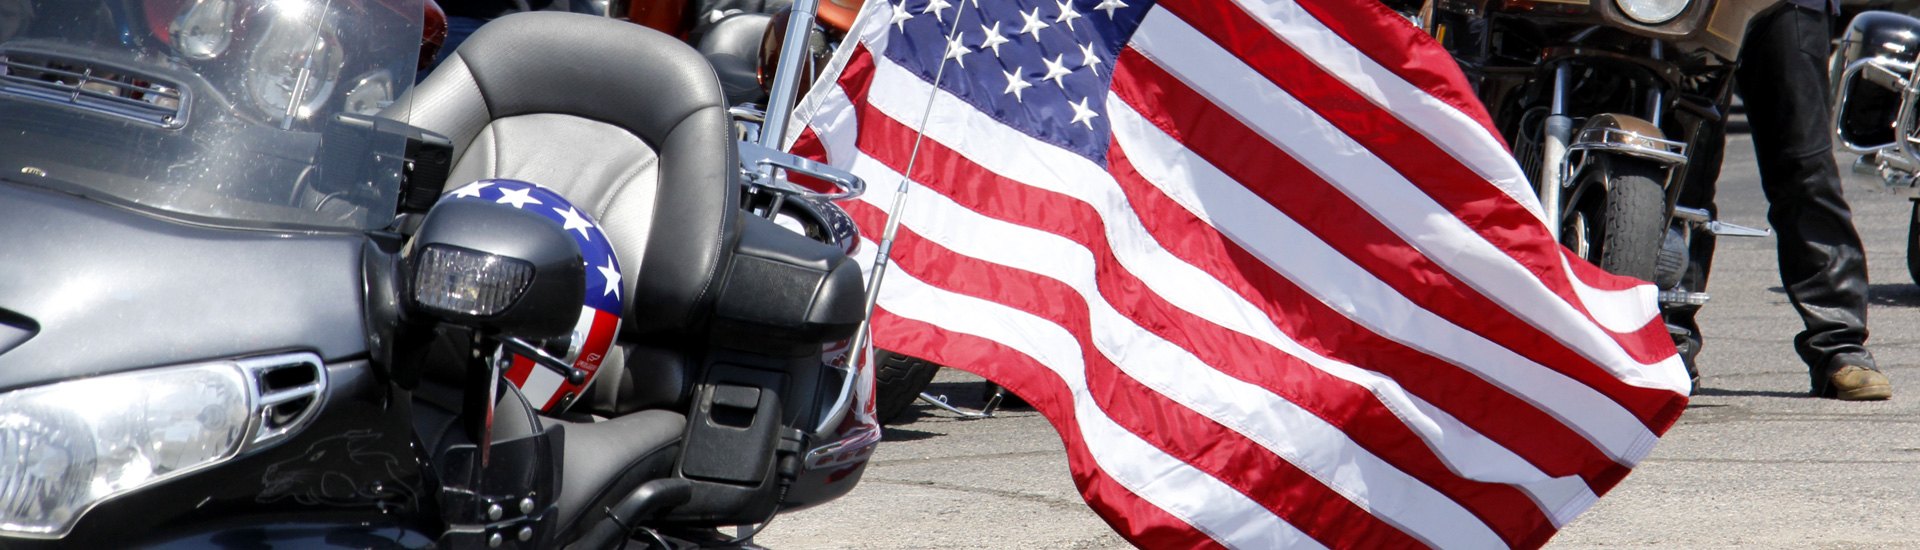 Universal Motorcycle Flags, Banners & Signs